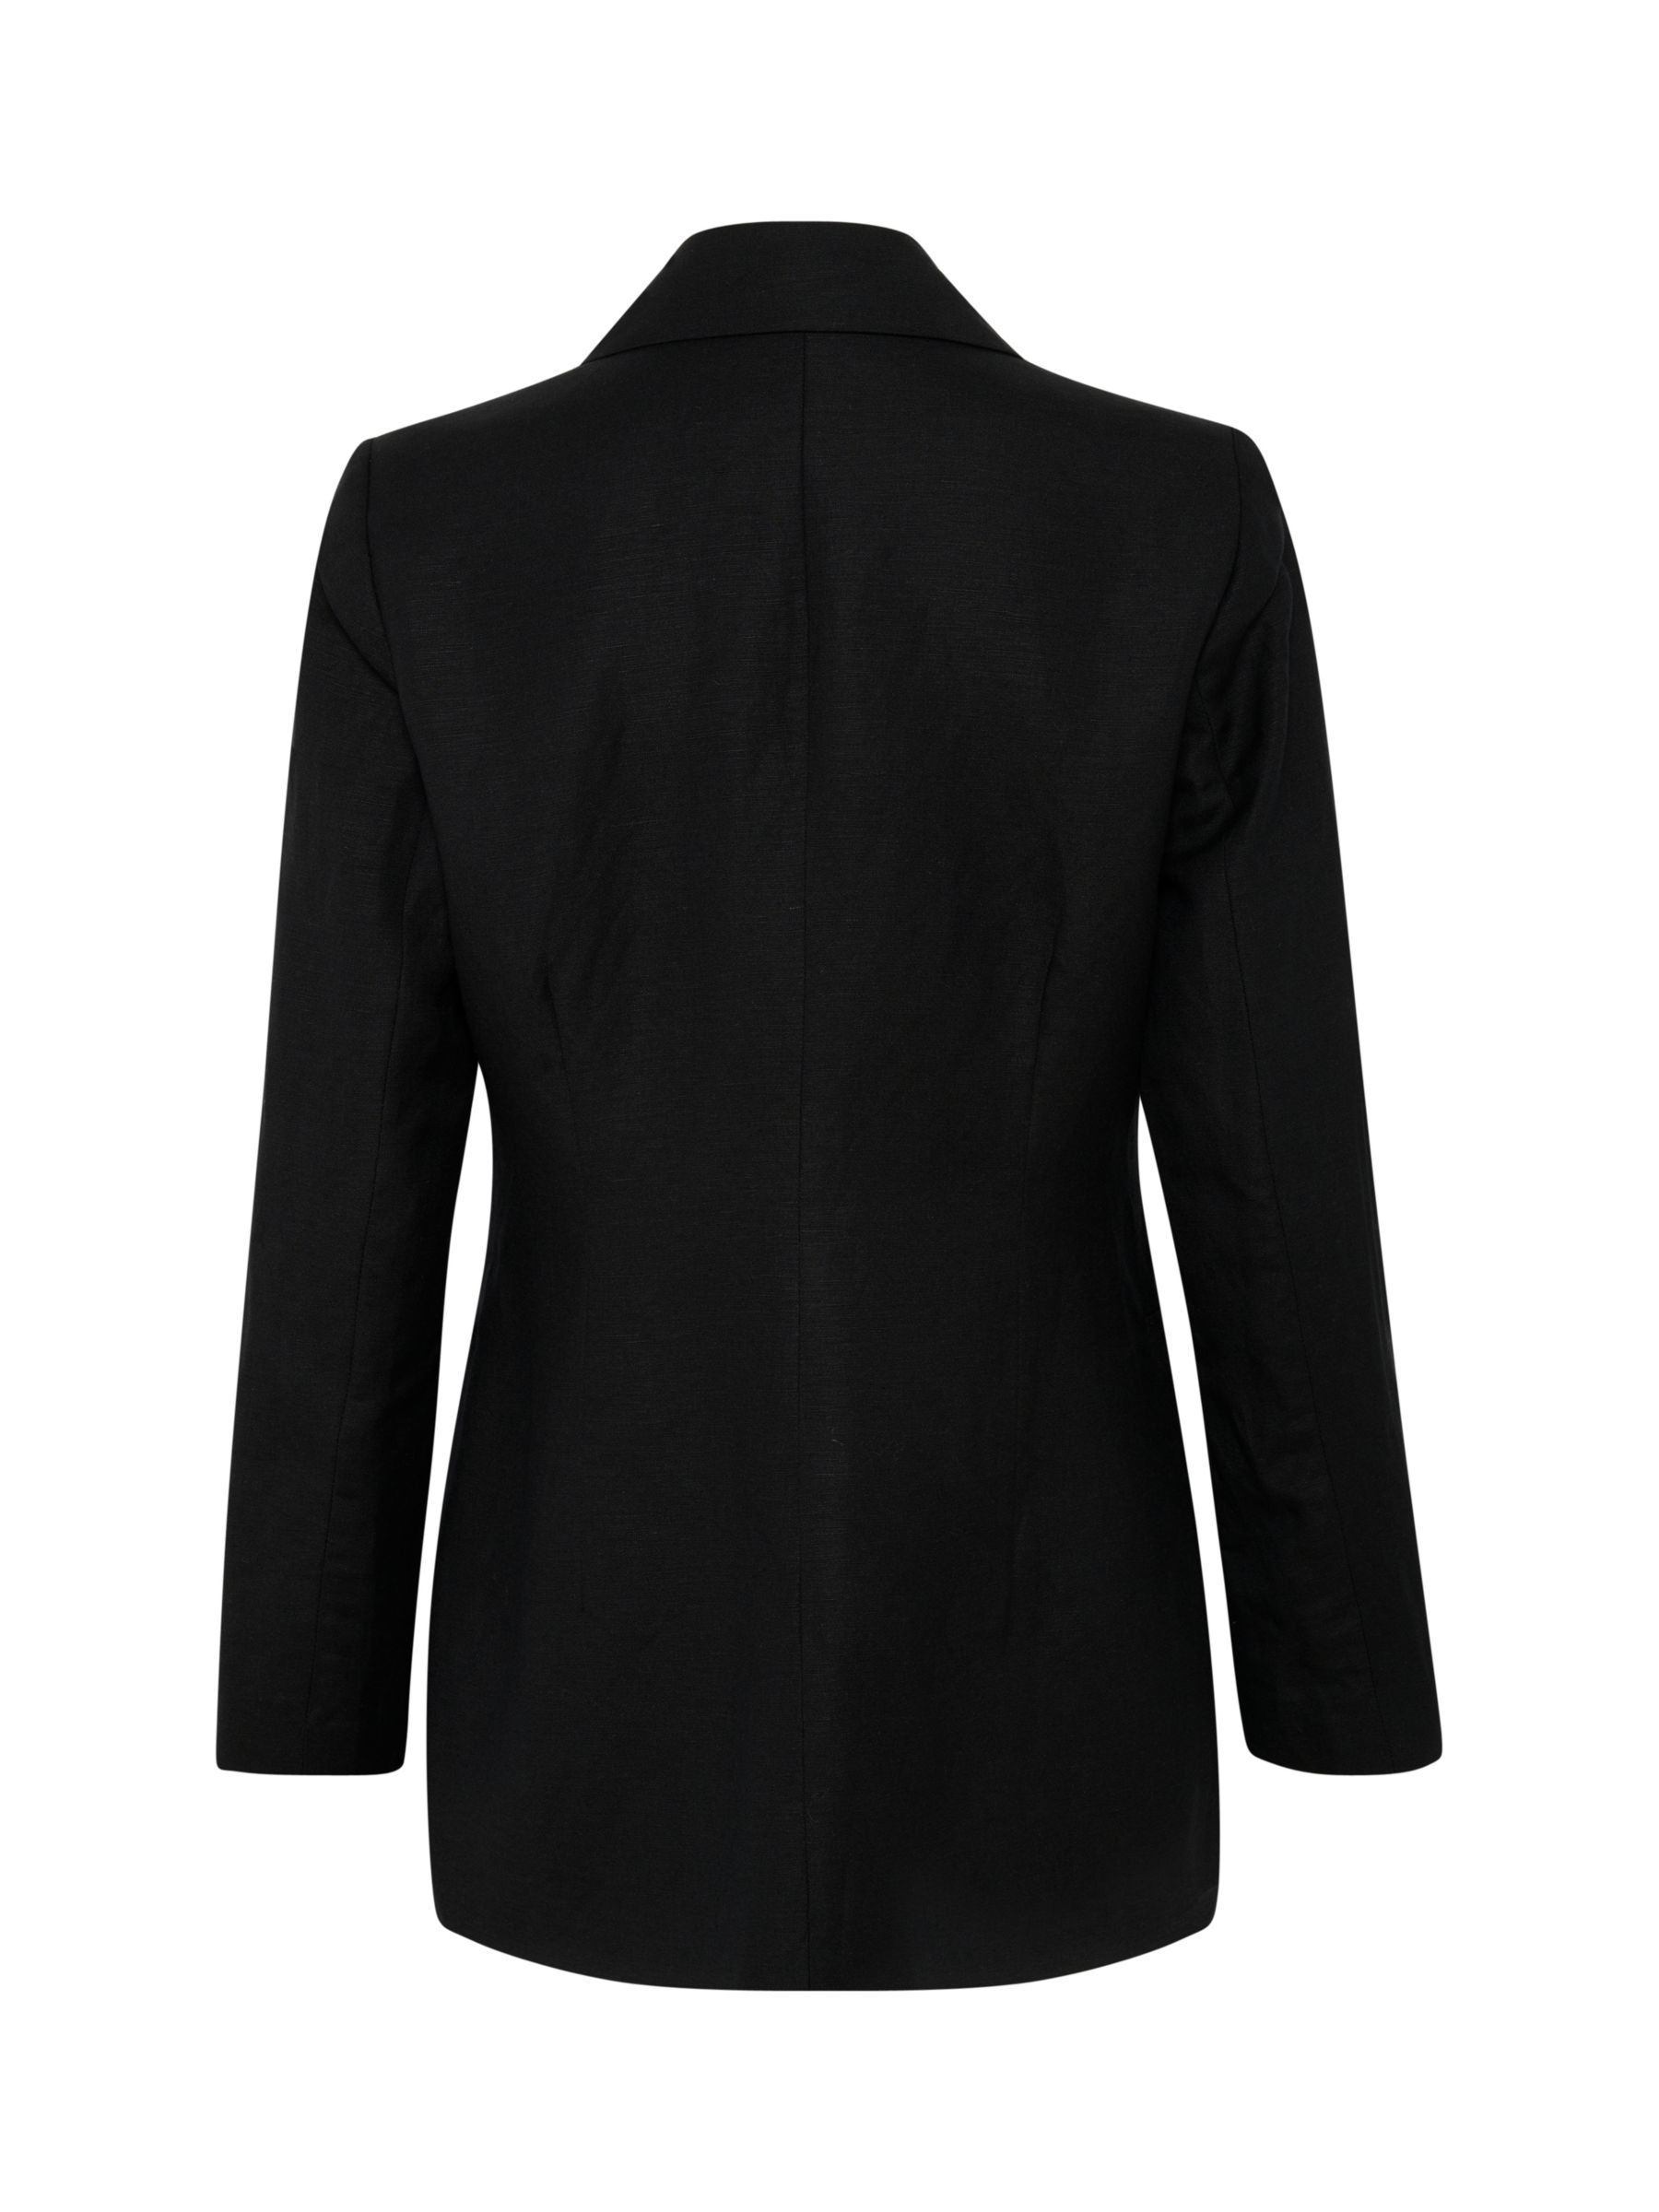 Buy Soaked In Luxury Malia Fitted Single Breasted Blazer, Black Online at johnlewis.com